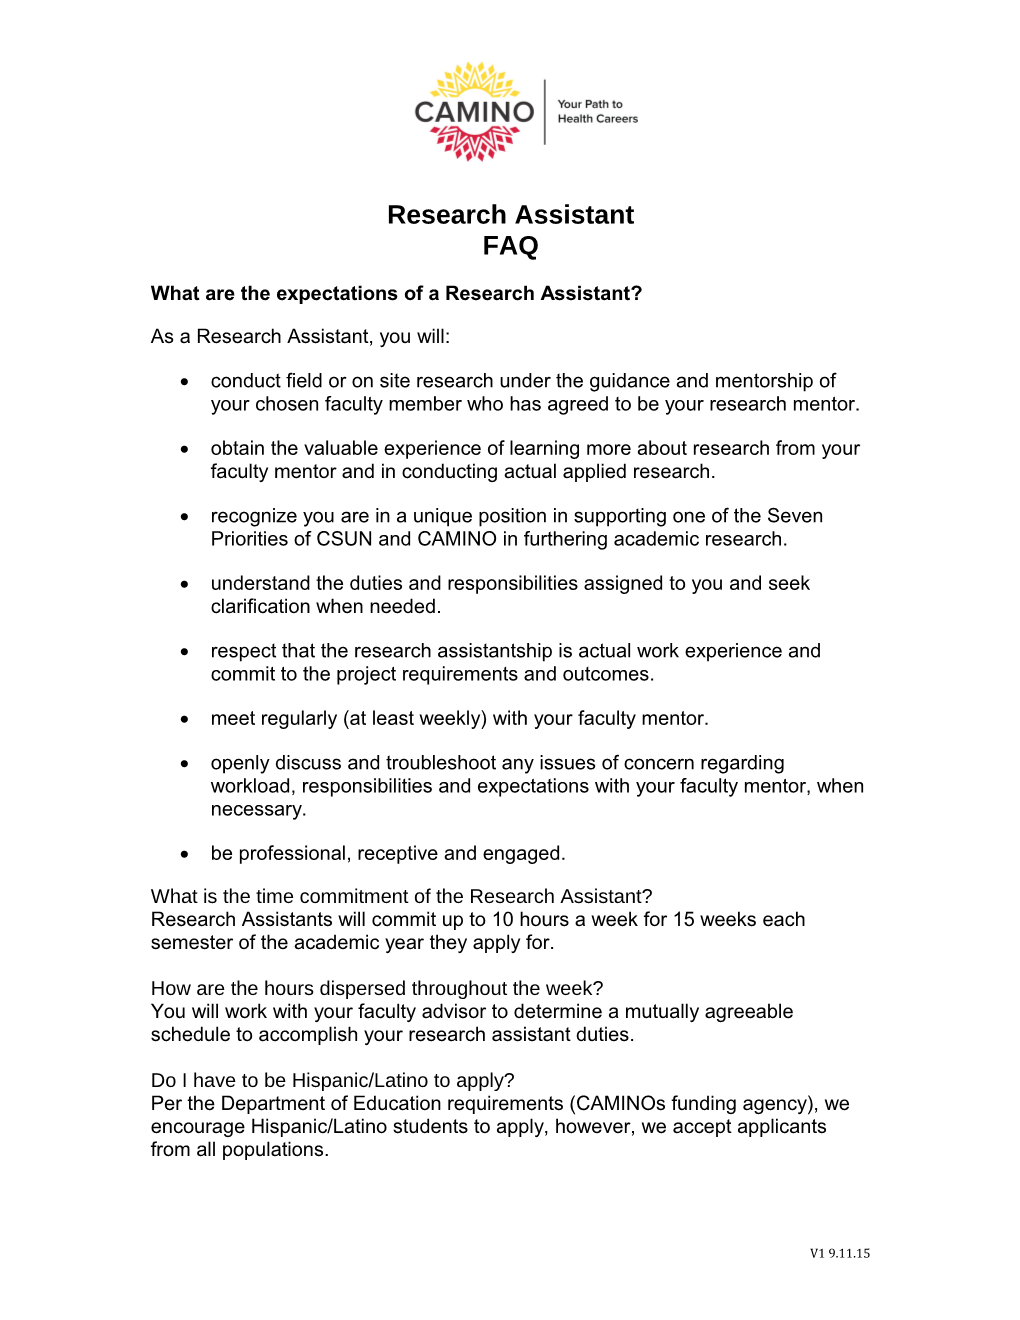 What Are the Expectations of a Research Assistant?